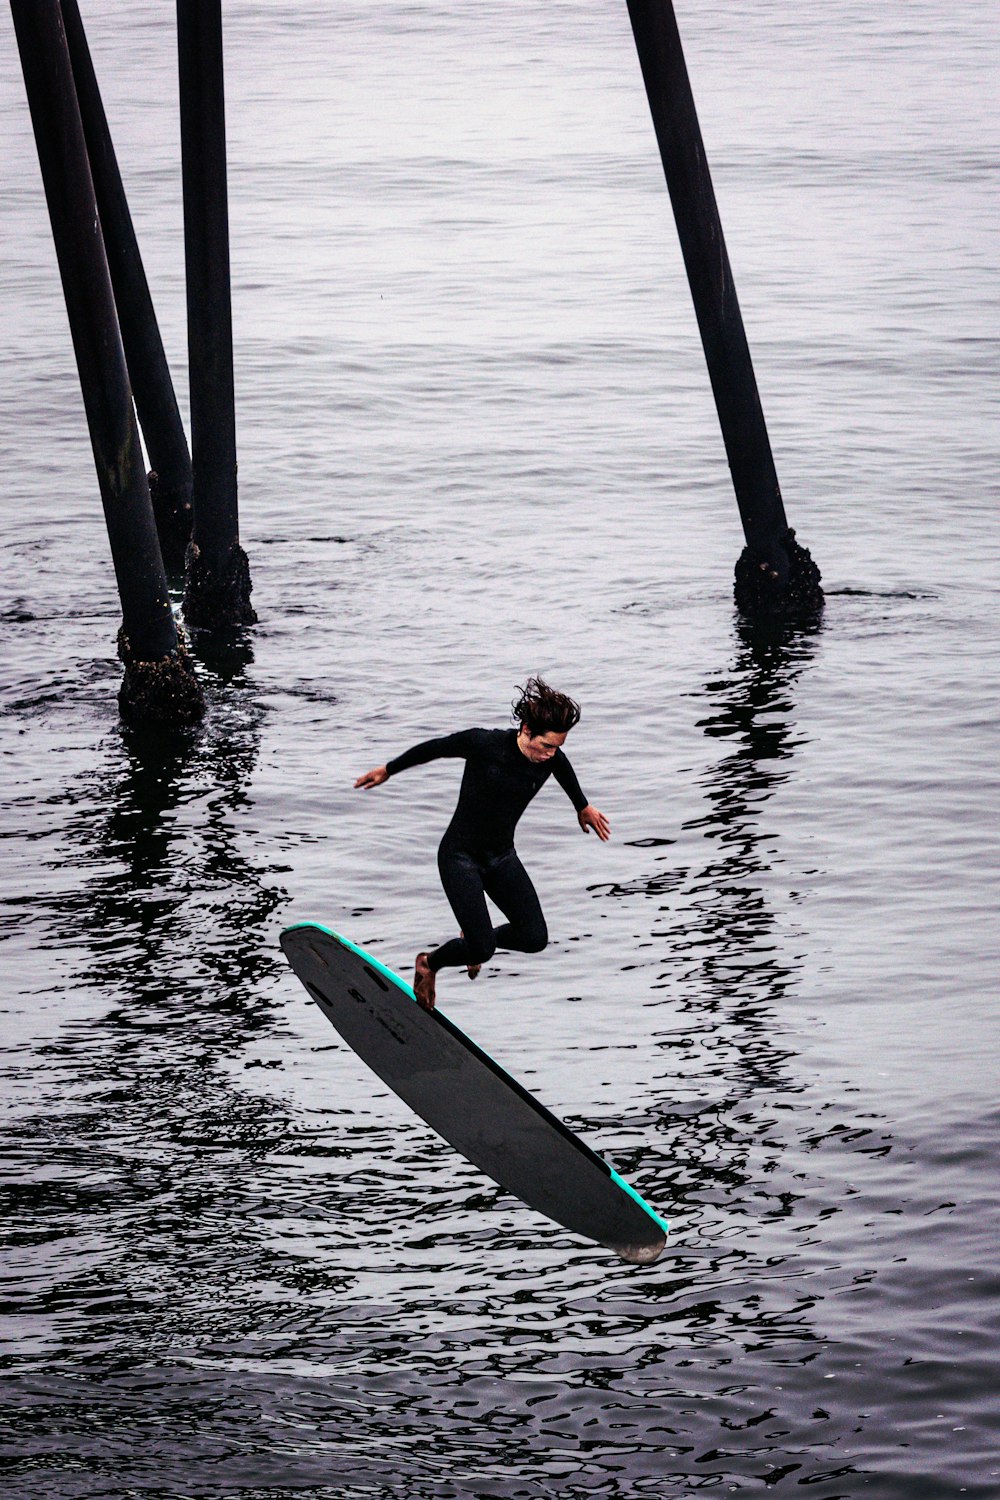 woman in black wetsuit riding on surfboard on body of water during daytime